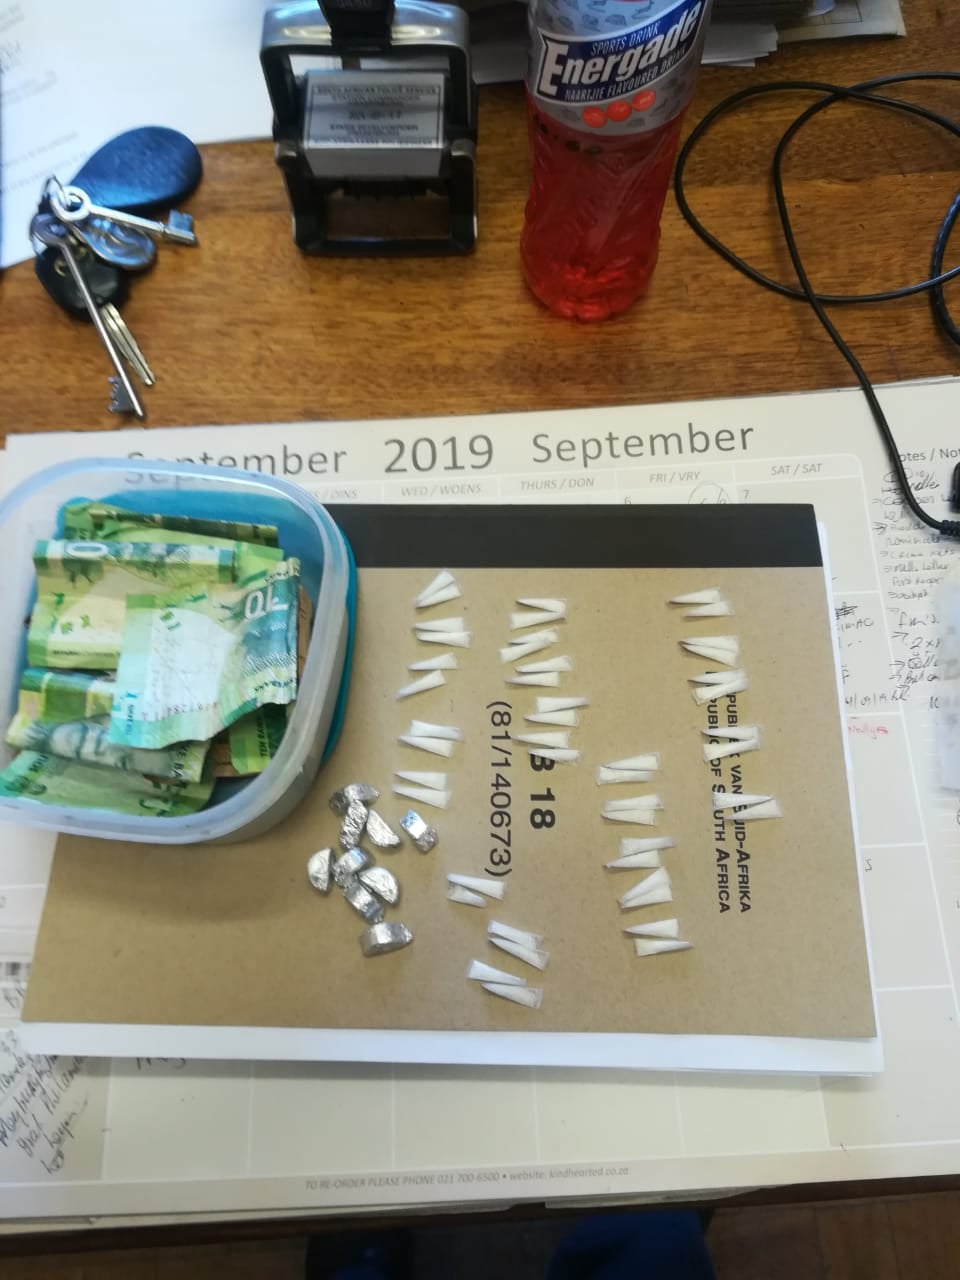 Two nabbed for dealing in drugs in Northern Cape